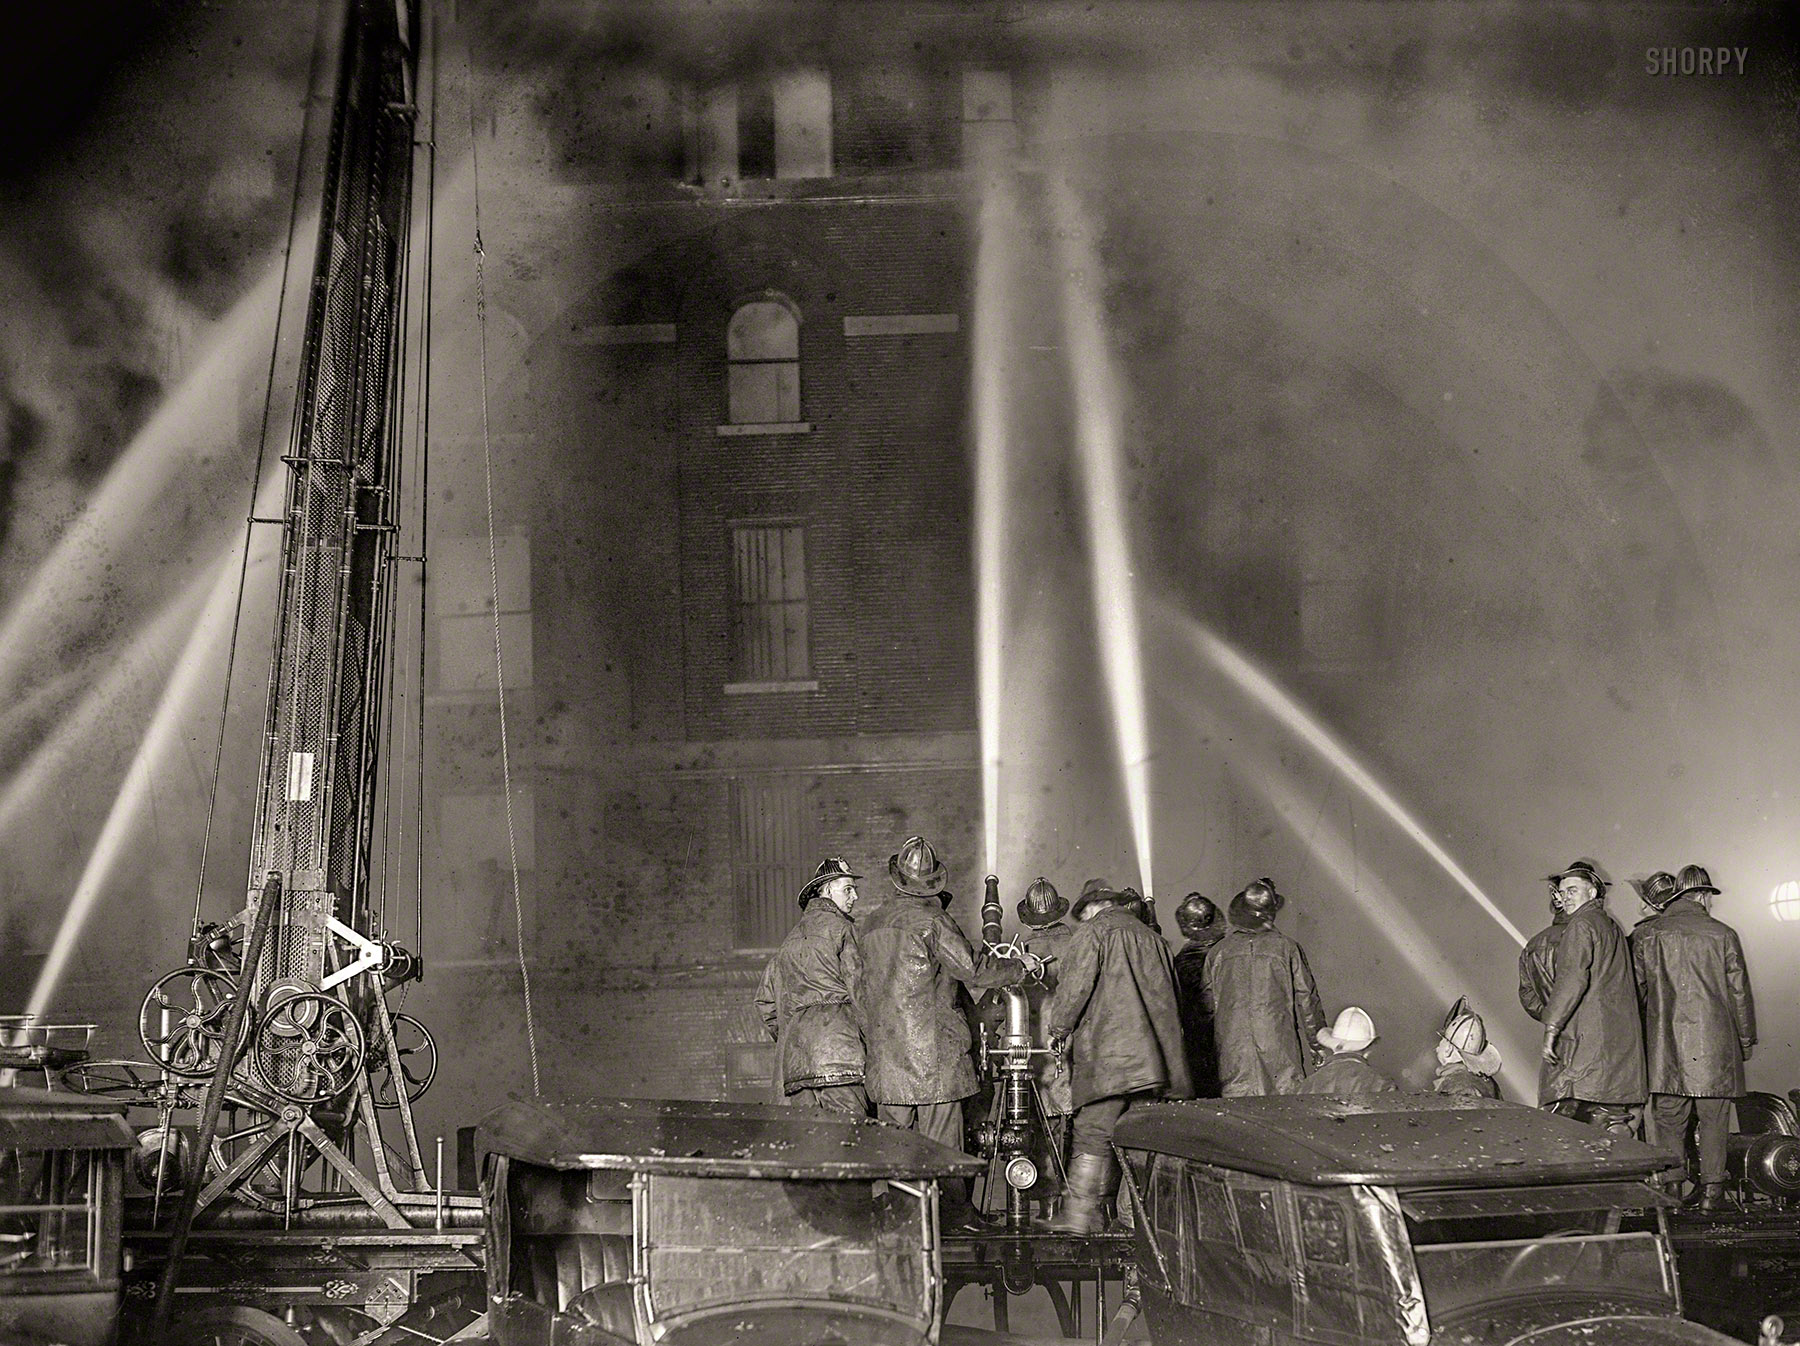 &nbsp; &nbsp; &nbsp; &nbsp; A spectacular fire that spread with a rapidity that stunned firemen virtually destroyed the five-story warehouse of S. Kann & Sons, at Eighth and D streets northwest, shortly after 7 o'clock last night. Merchandise valued at $175,000 was destroyed by the fire, which raced through the building as though fanned by a giant bellows.
&nbsp; &nbsp; &nbsp; &nbsp; It is believed that a cigarette was accidentally thrown into a basket of excelsior and that the basket was moved into the packing room from the street. -- Washington Post
January 10, 1925. Washington, D.C. "Fire at S. Kanns warehouse, Eighth and D streets N.W." National Photo Company Collection glass negative. View full size.